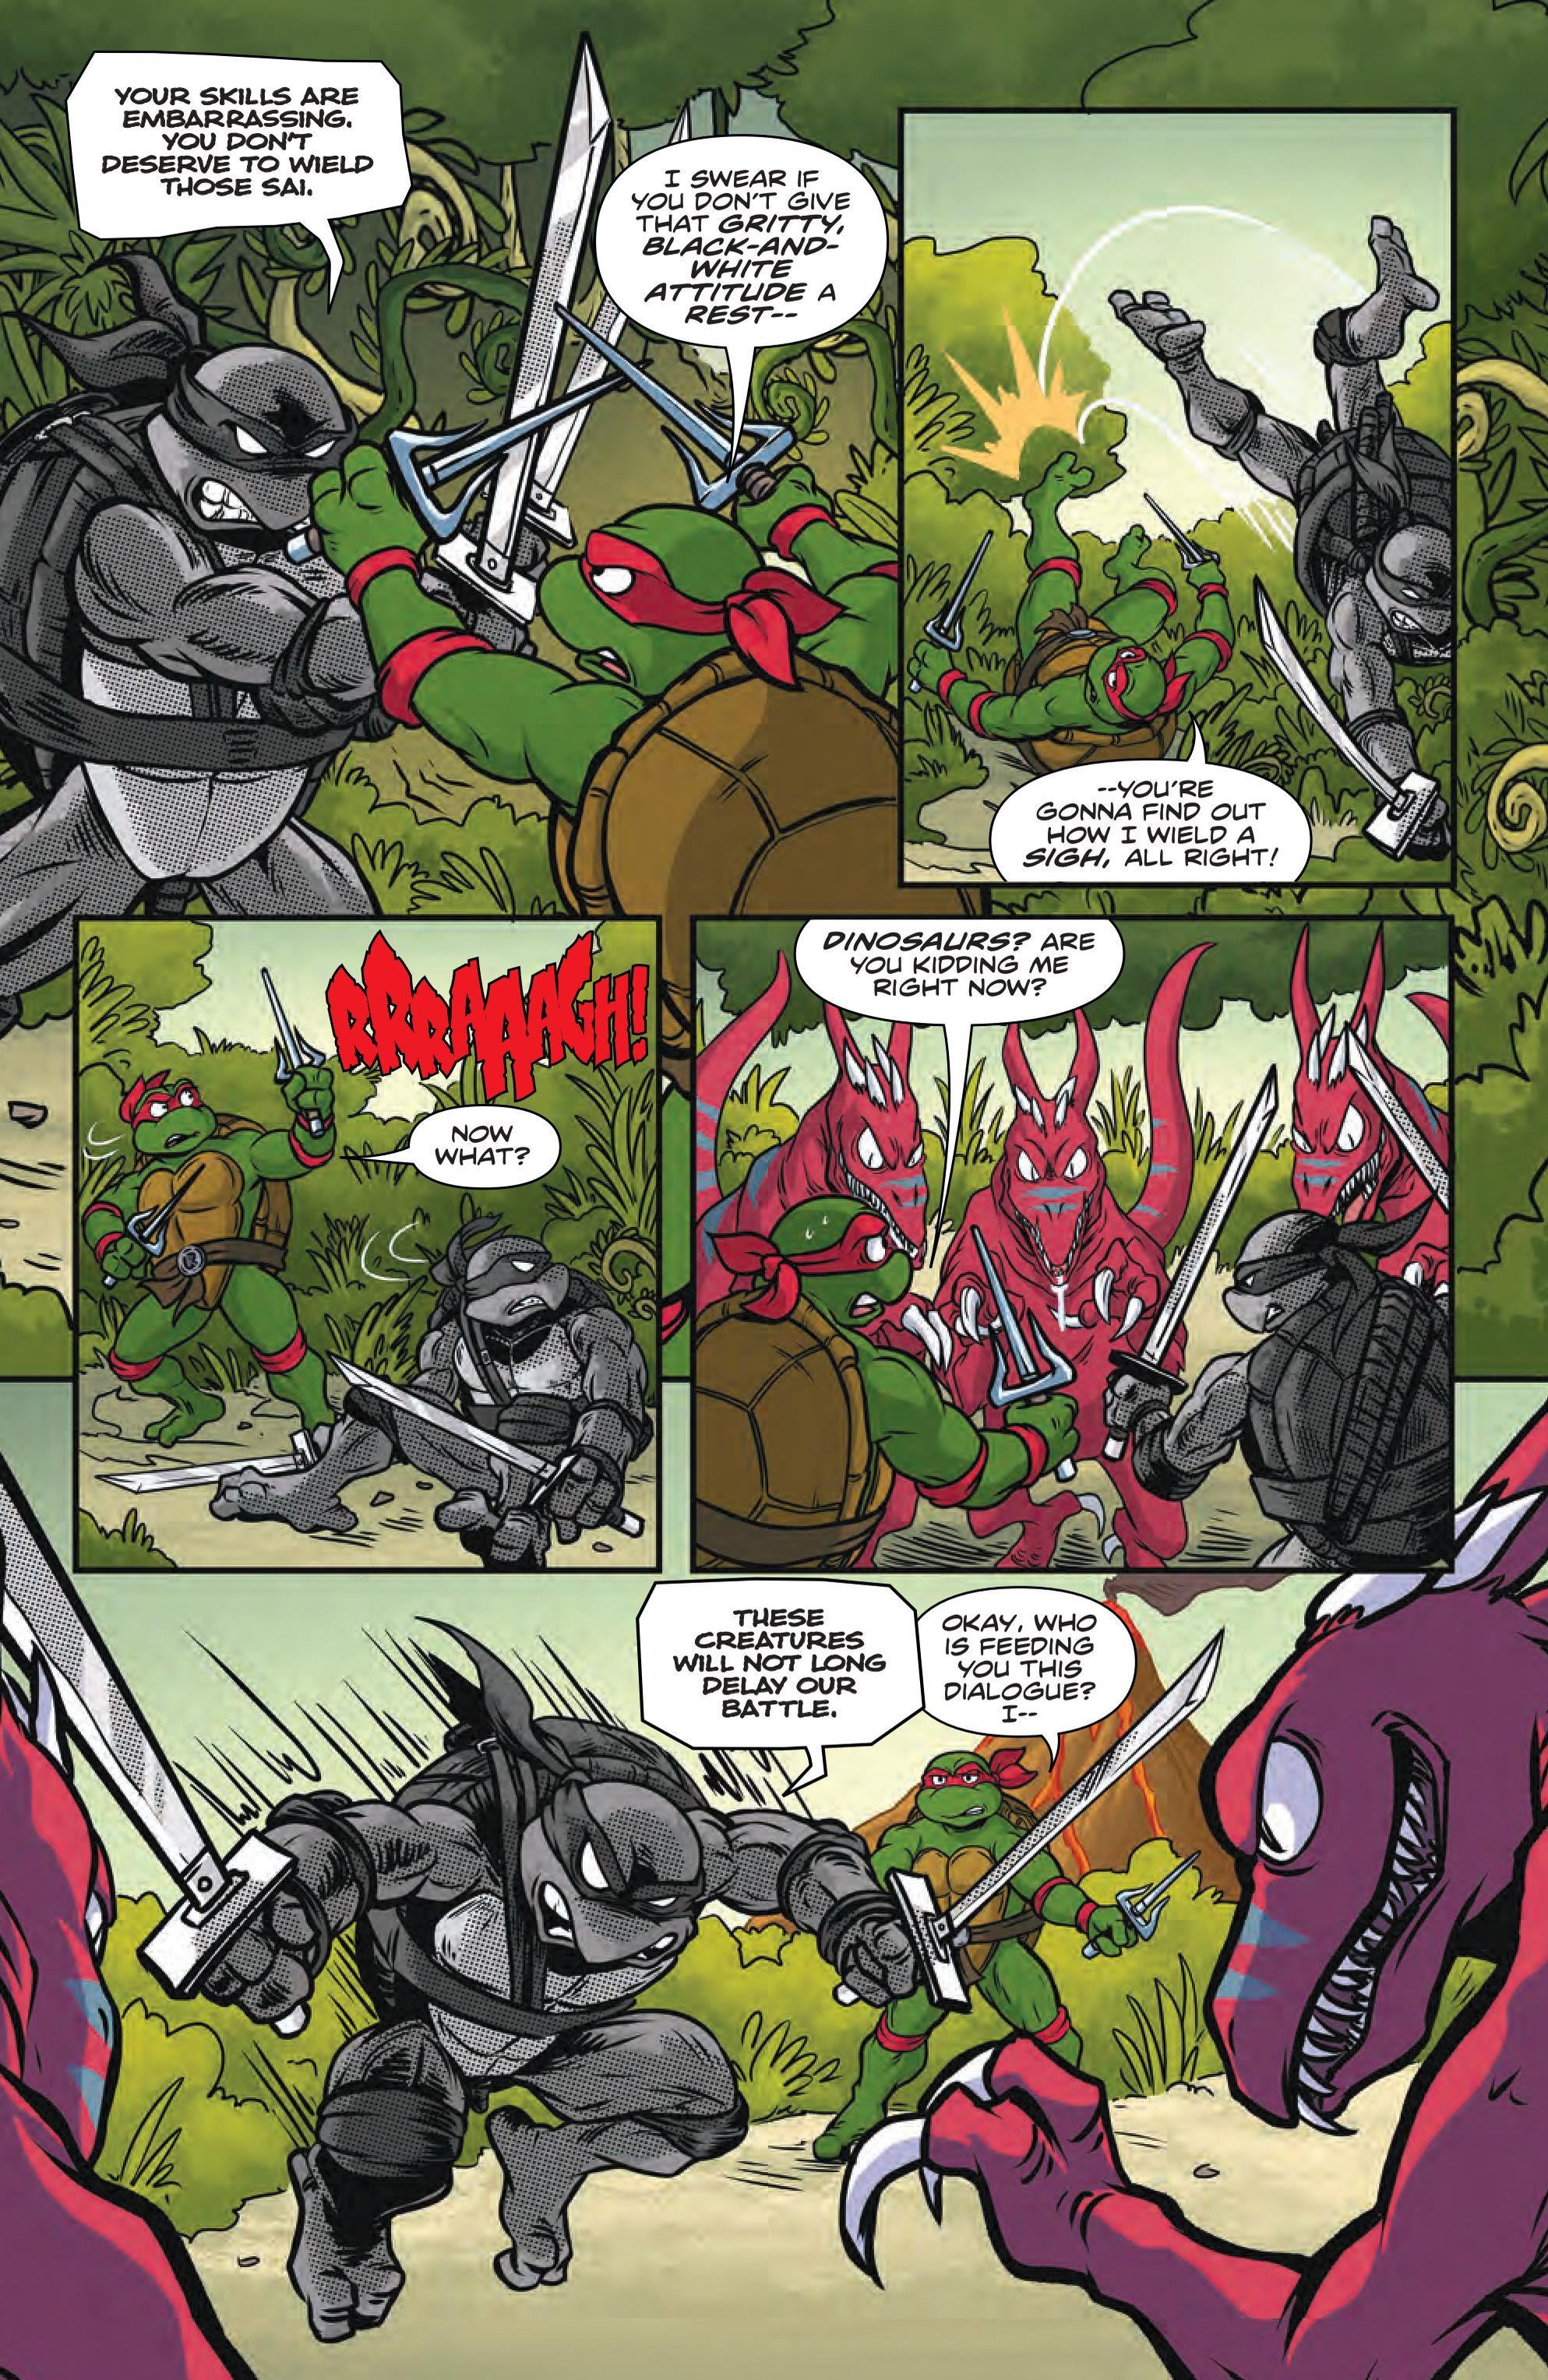 tmnt-sma-cont-13-lo-images-11.jpg